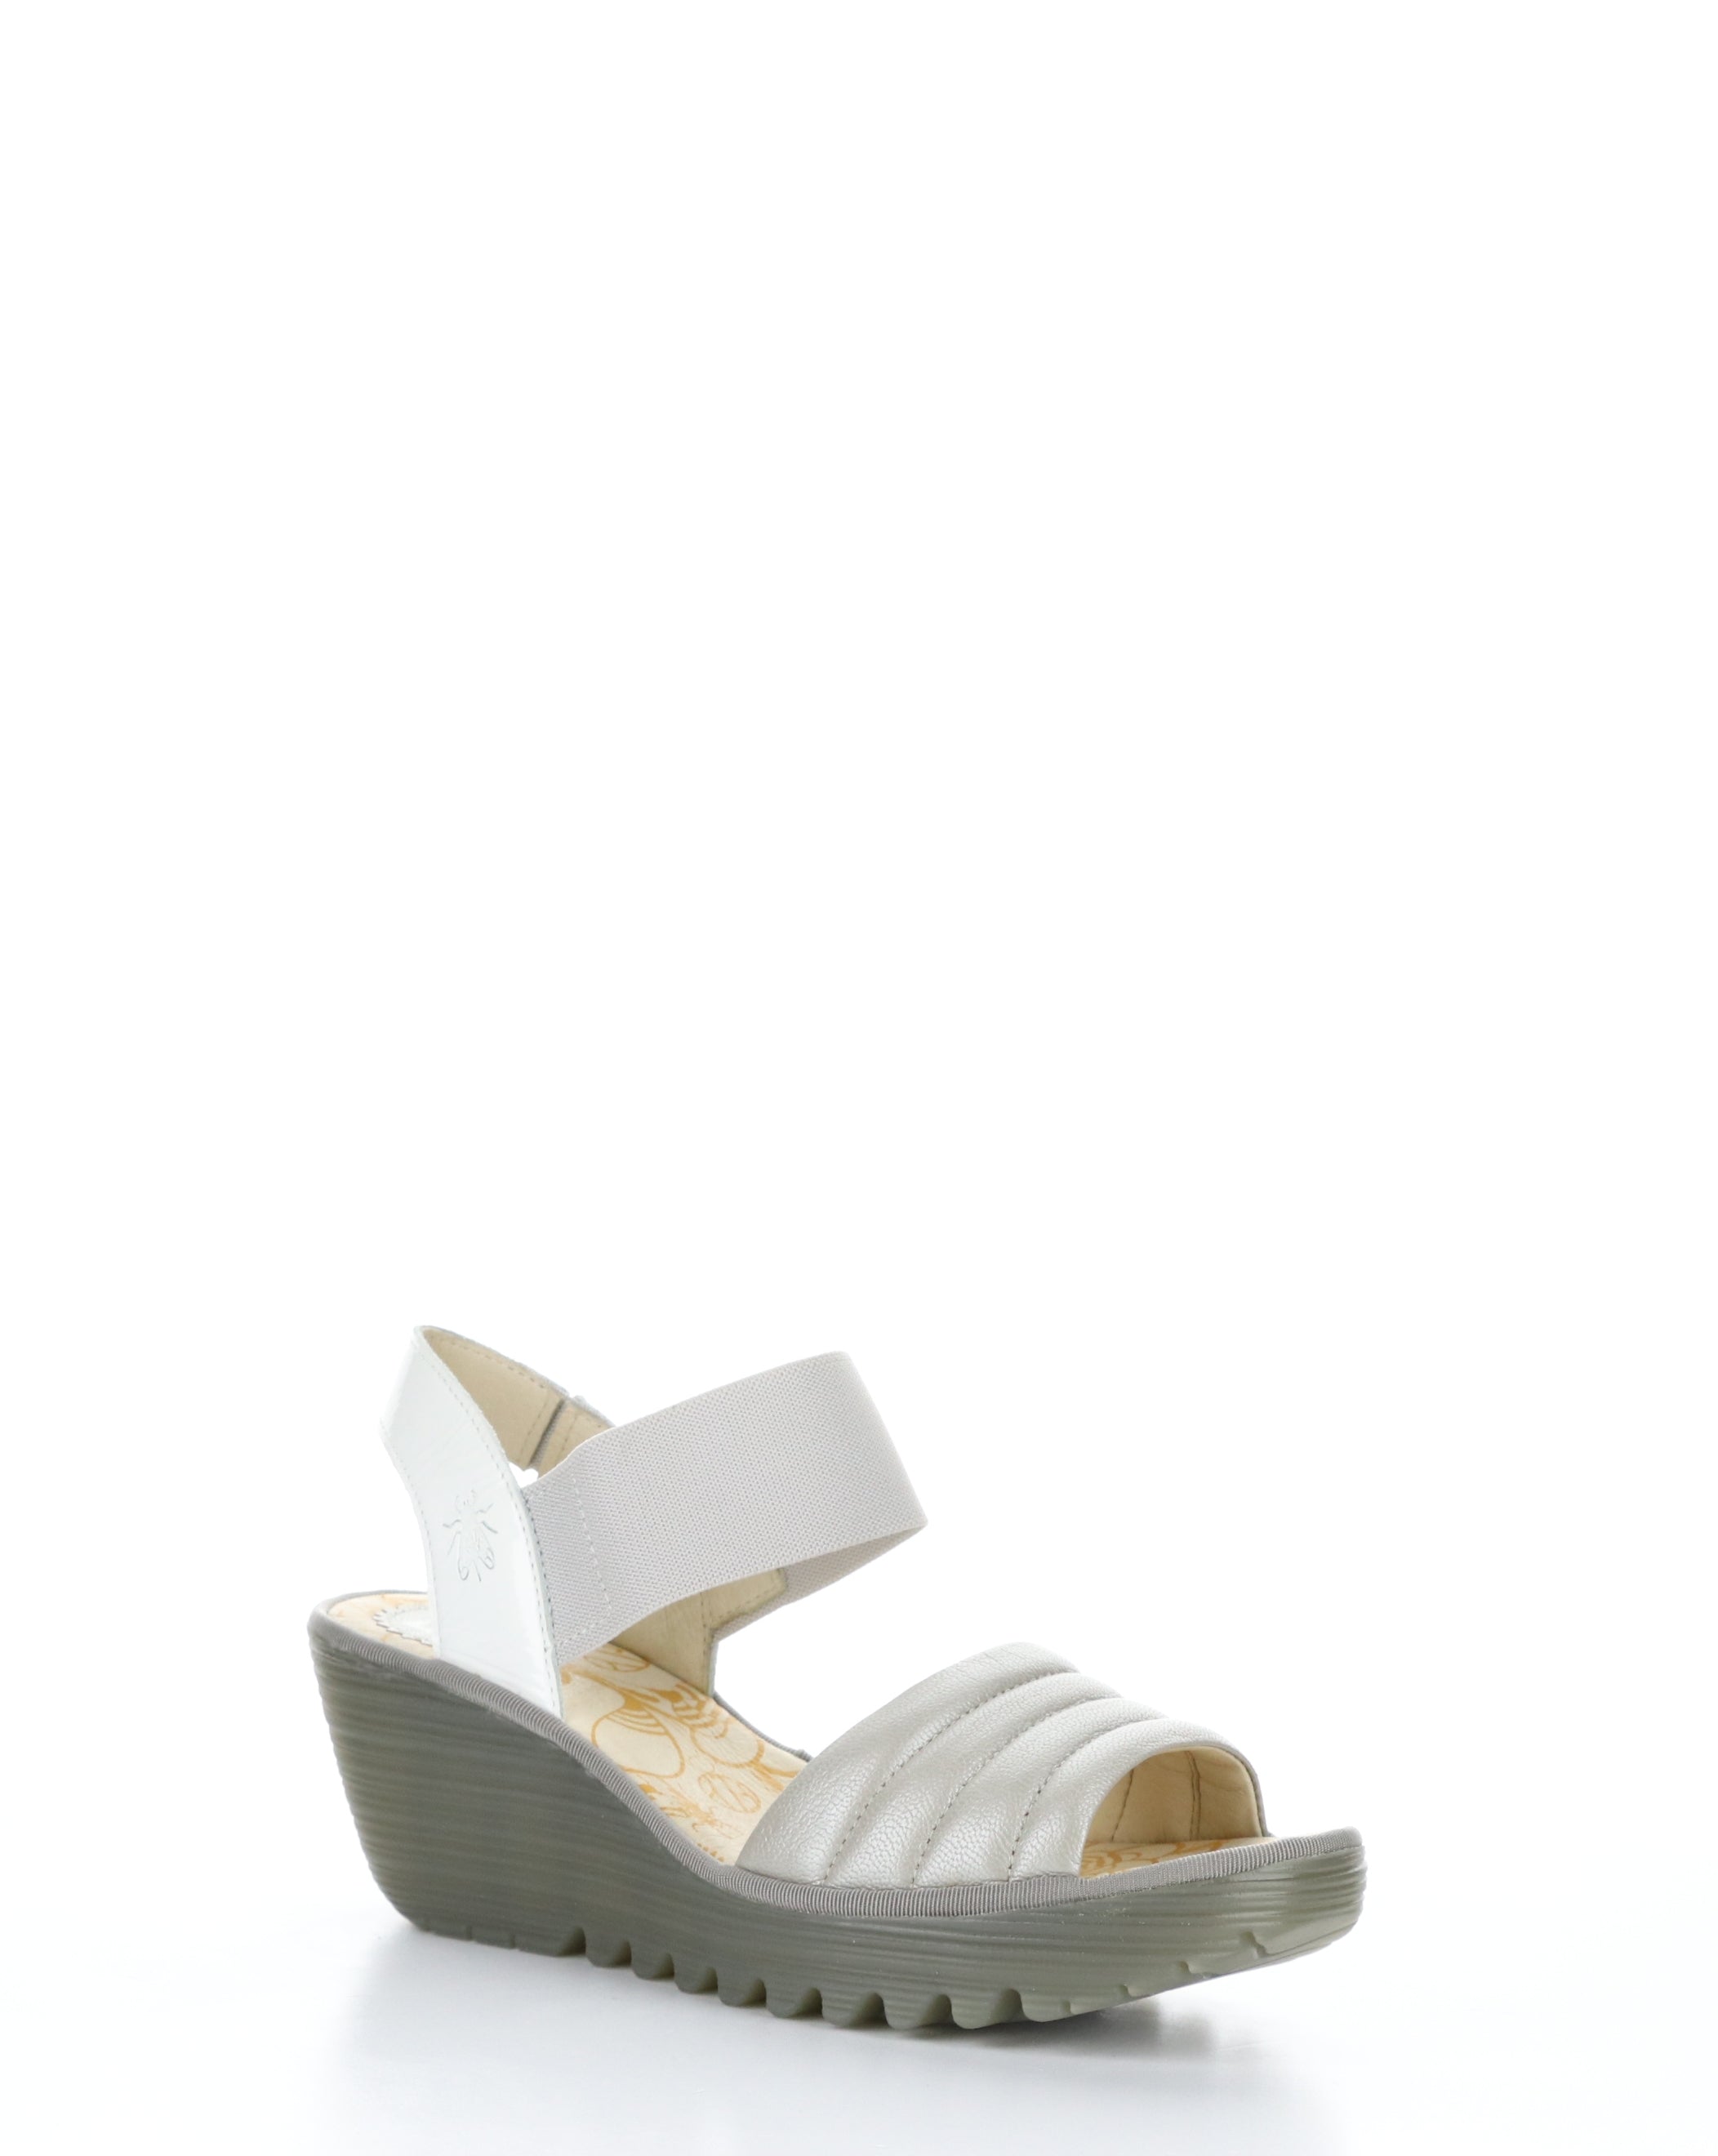 Fly London Yiko Silver/Off White Leather Wedge Sandal